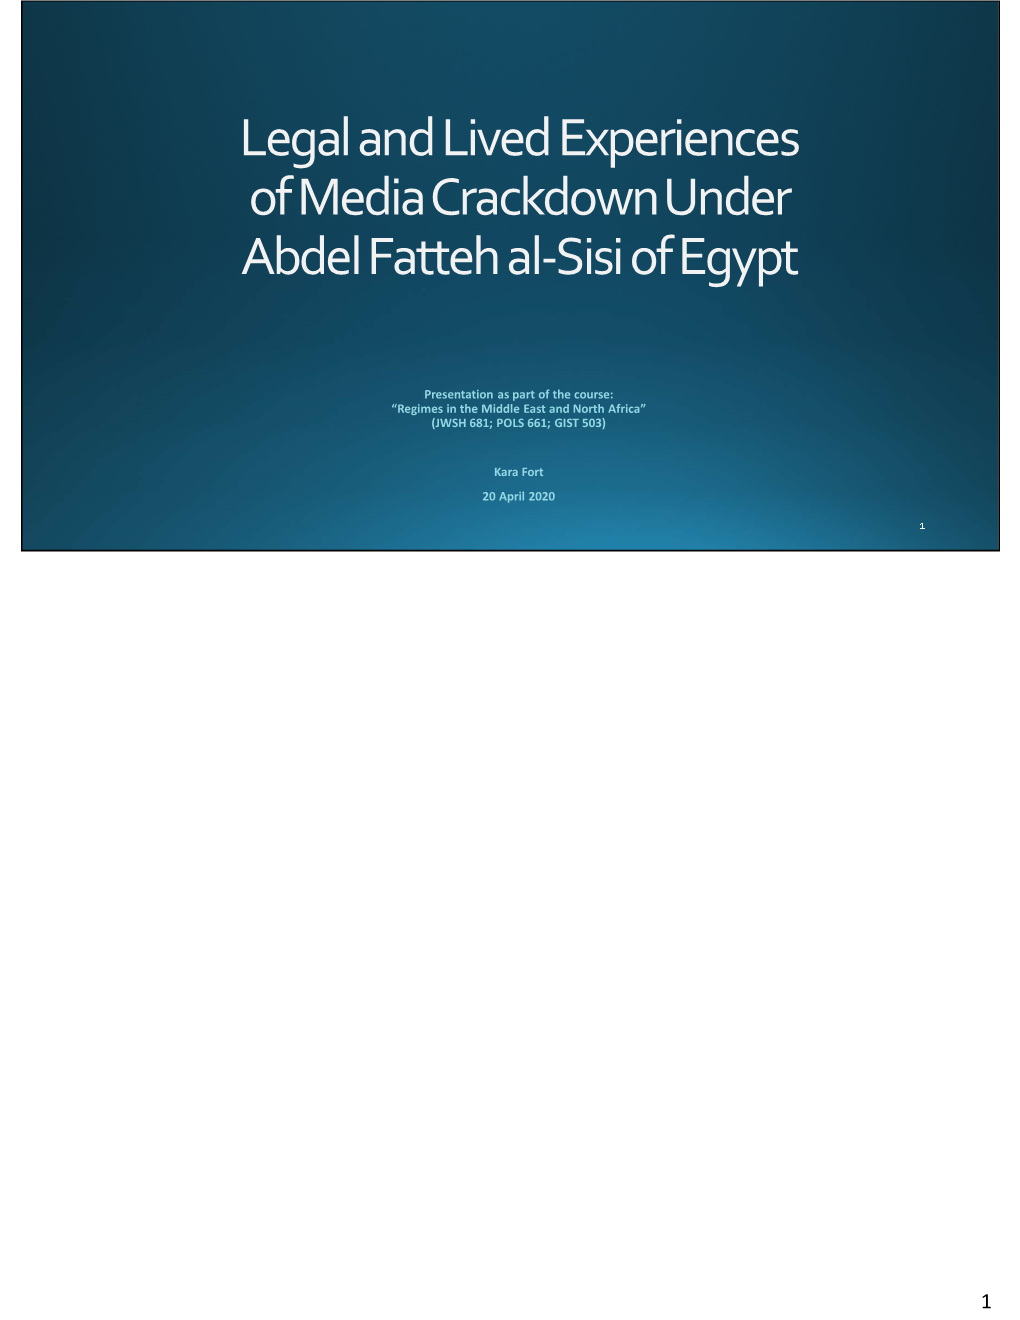 Legal and Lived Experiences of Media Crackdown Under Abdel Fattehal-Sisiof Egypt